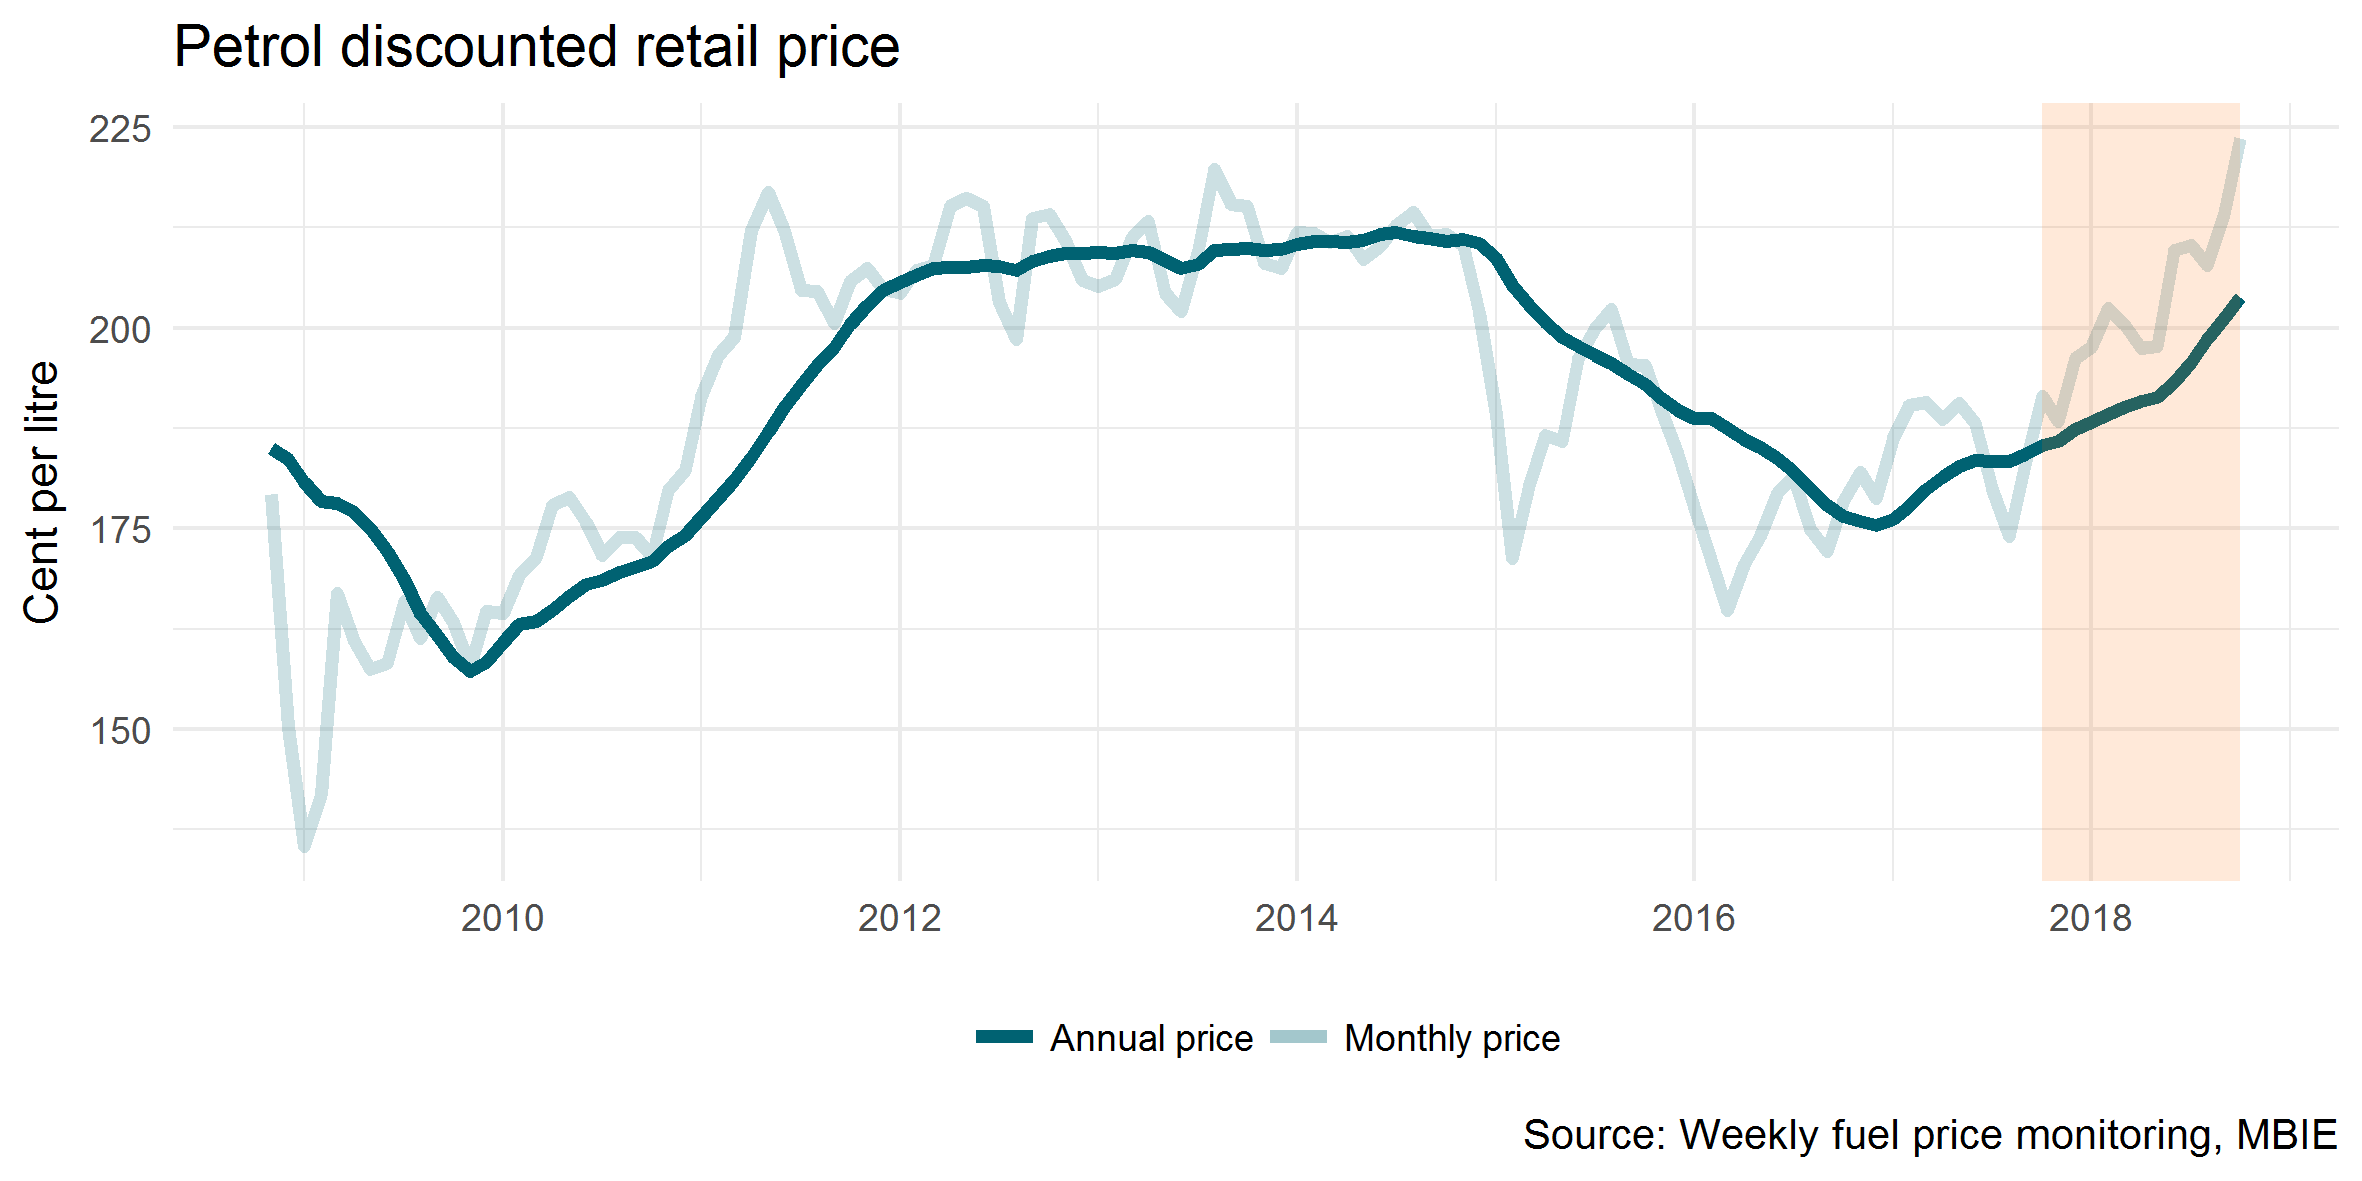 Petrol discounted retail prices